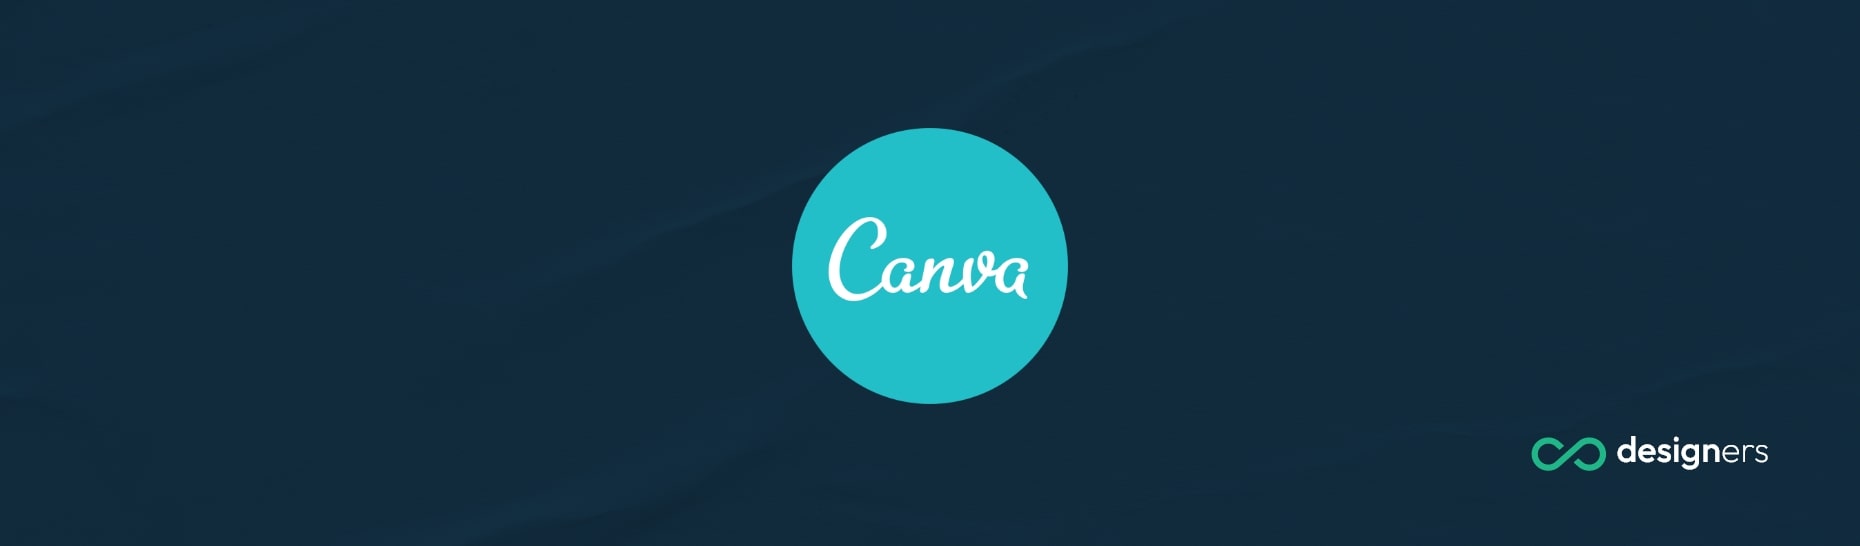 What Font Is Bodoni in Canva?